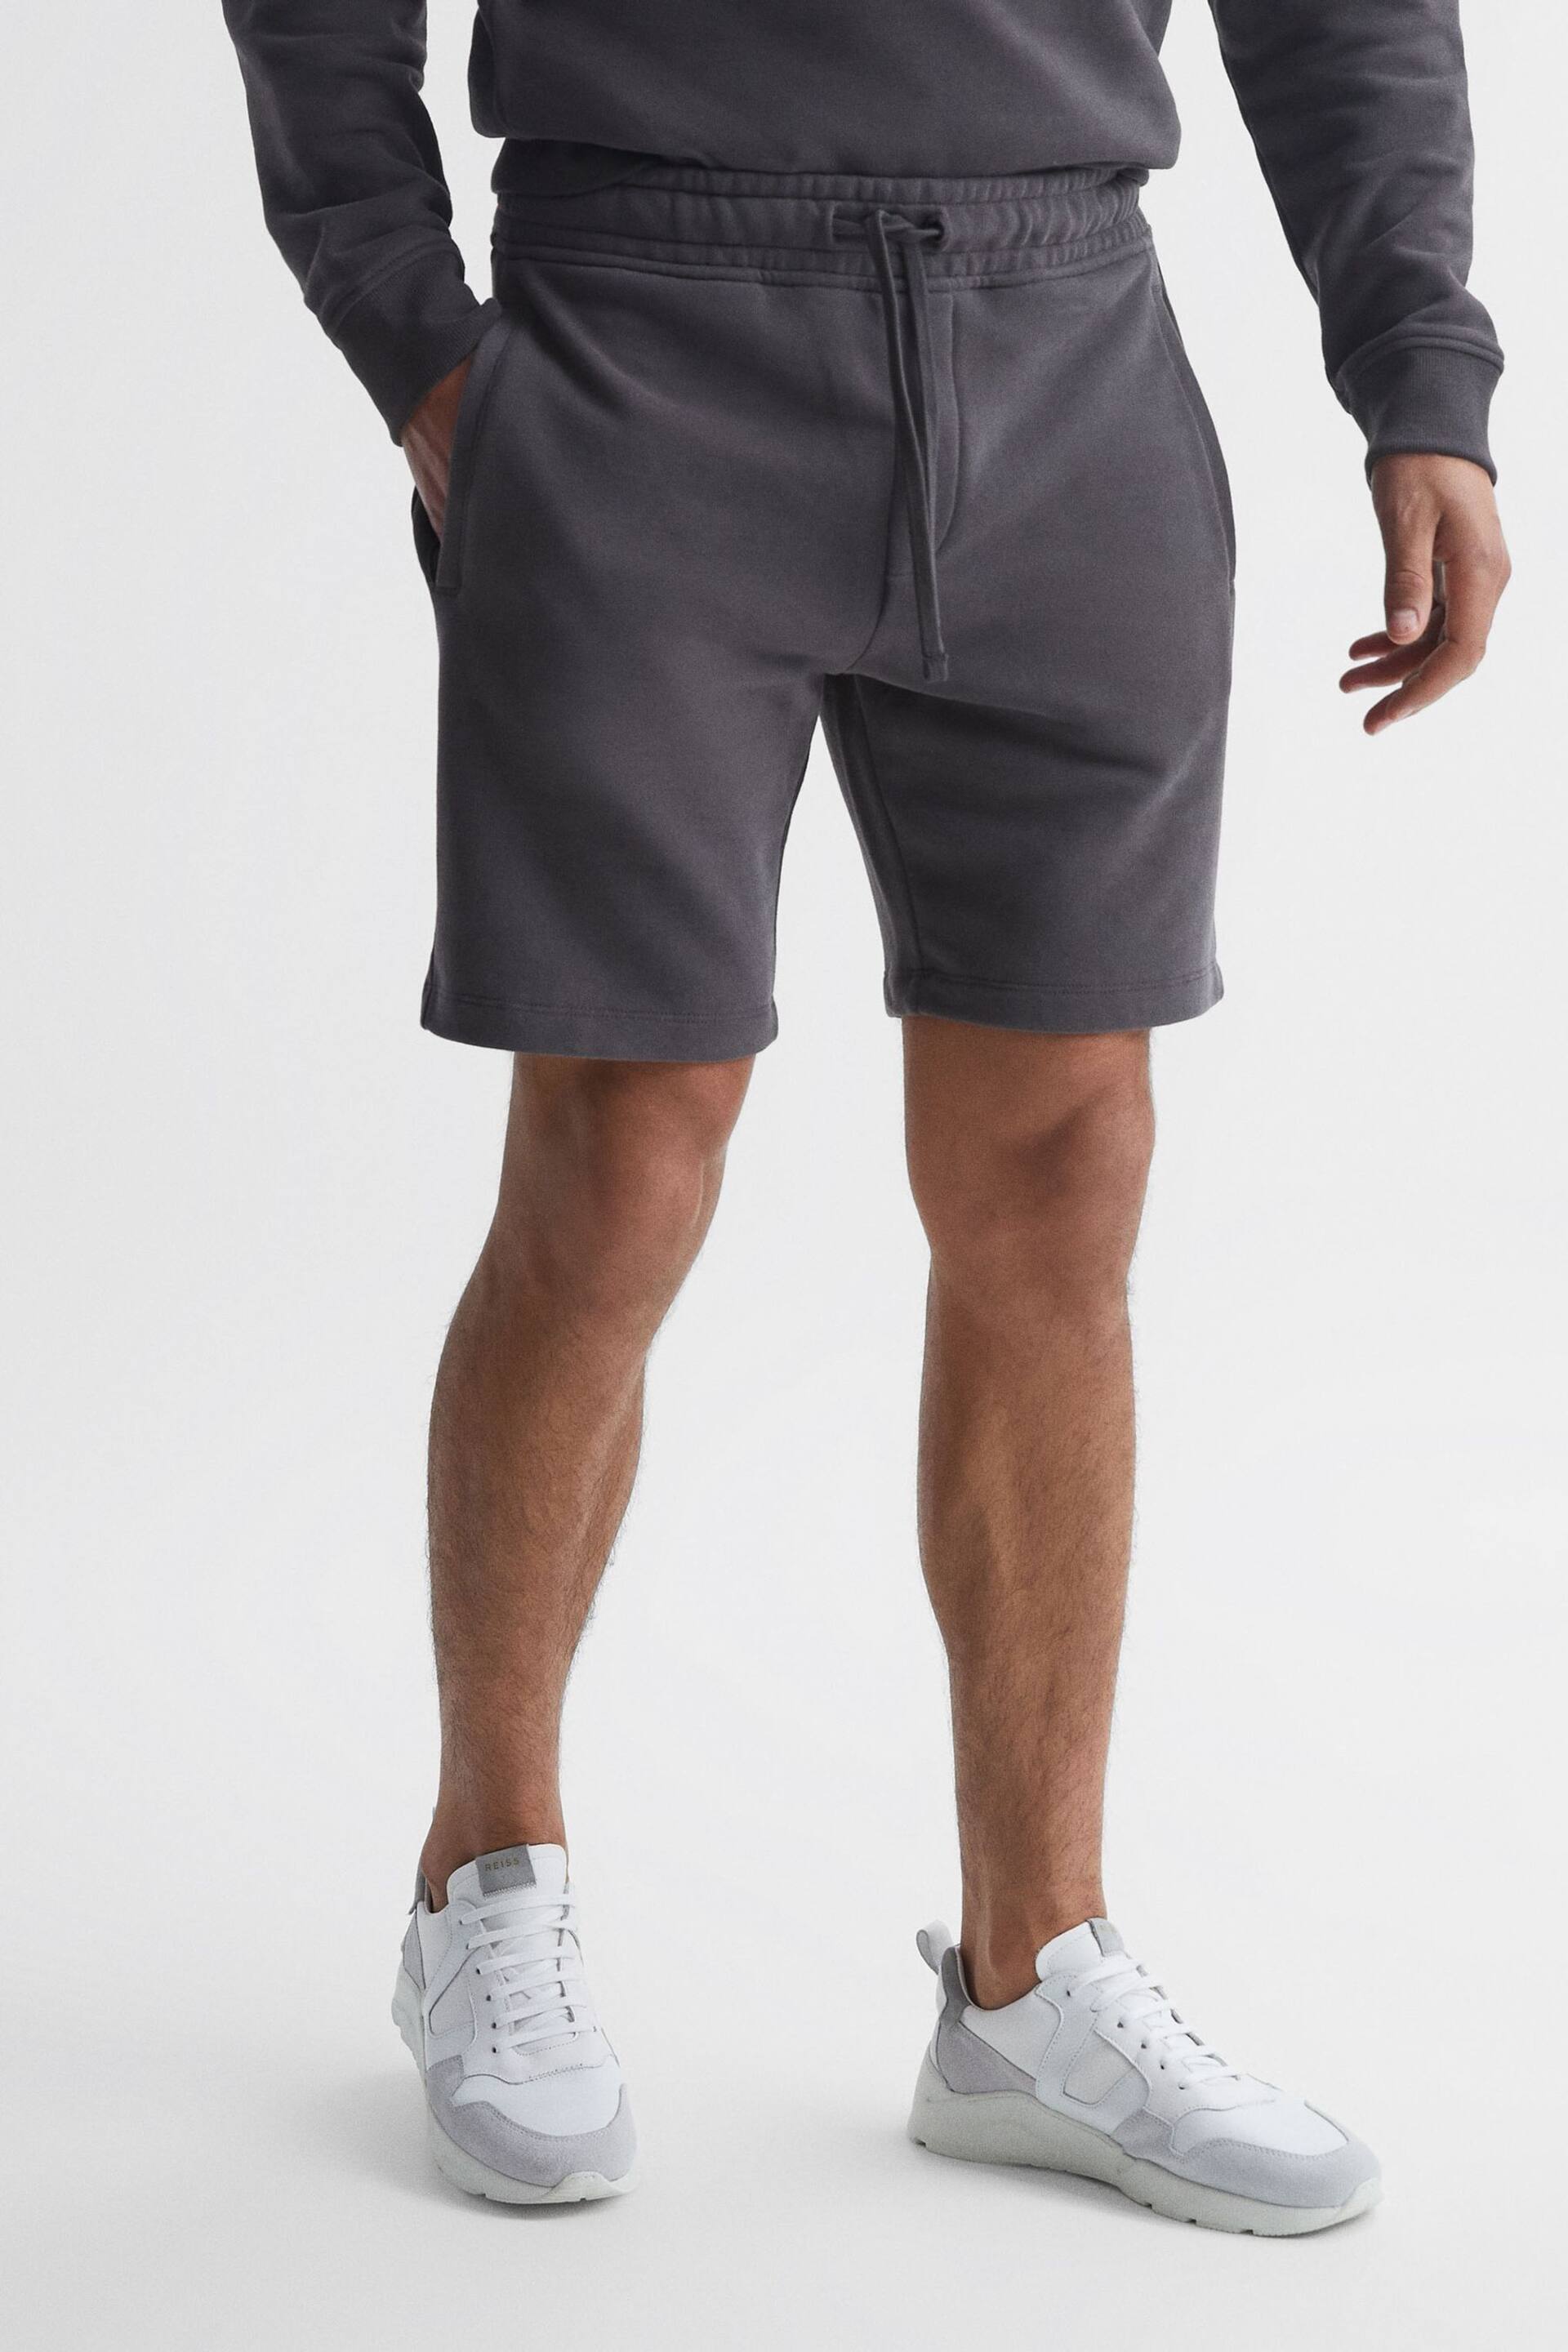 Reiss Washed Black Henry Garment Dye Jersey Shorts - Image 1 of 5